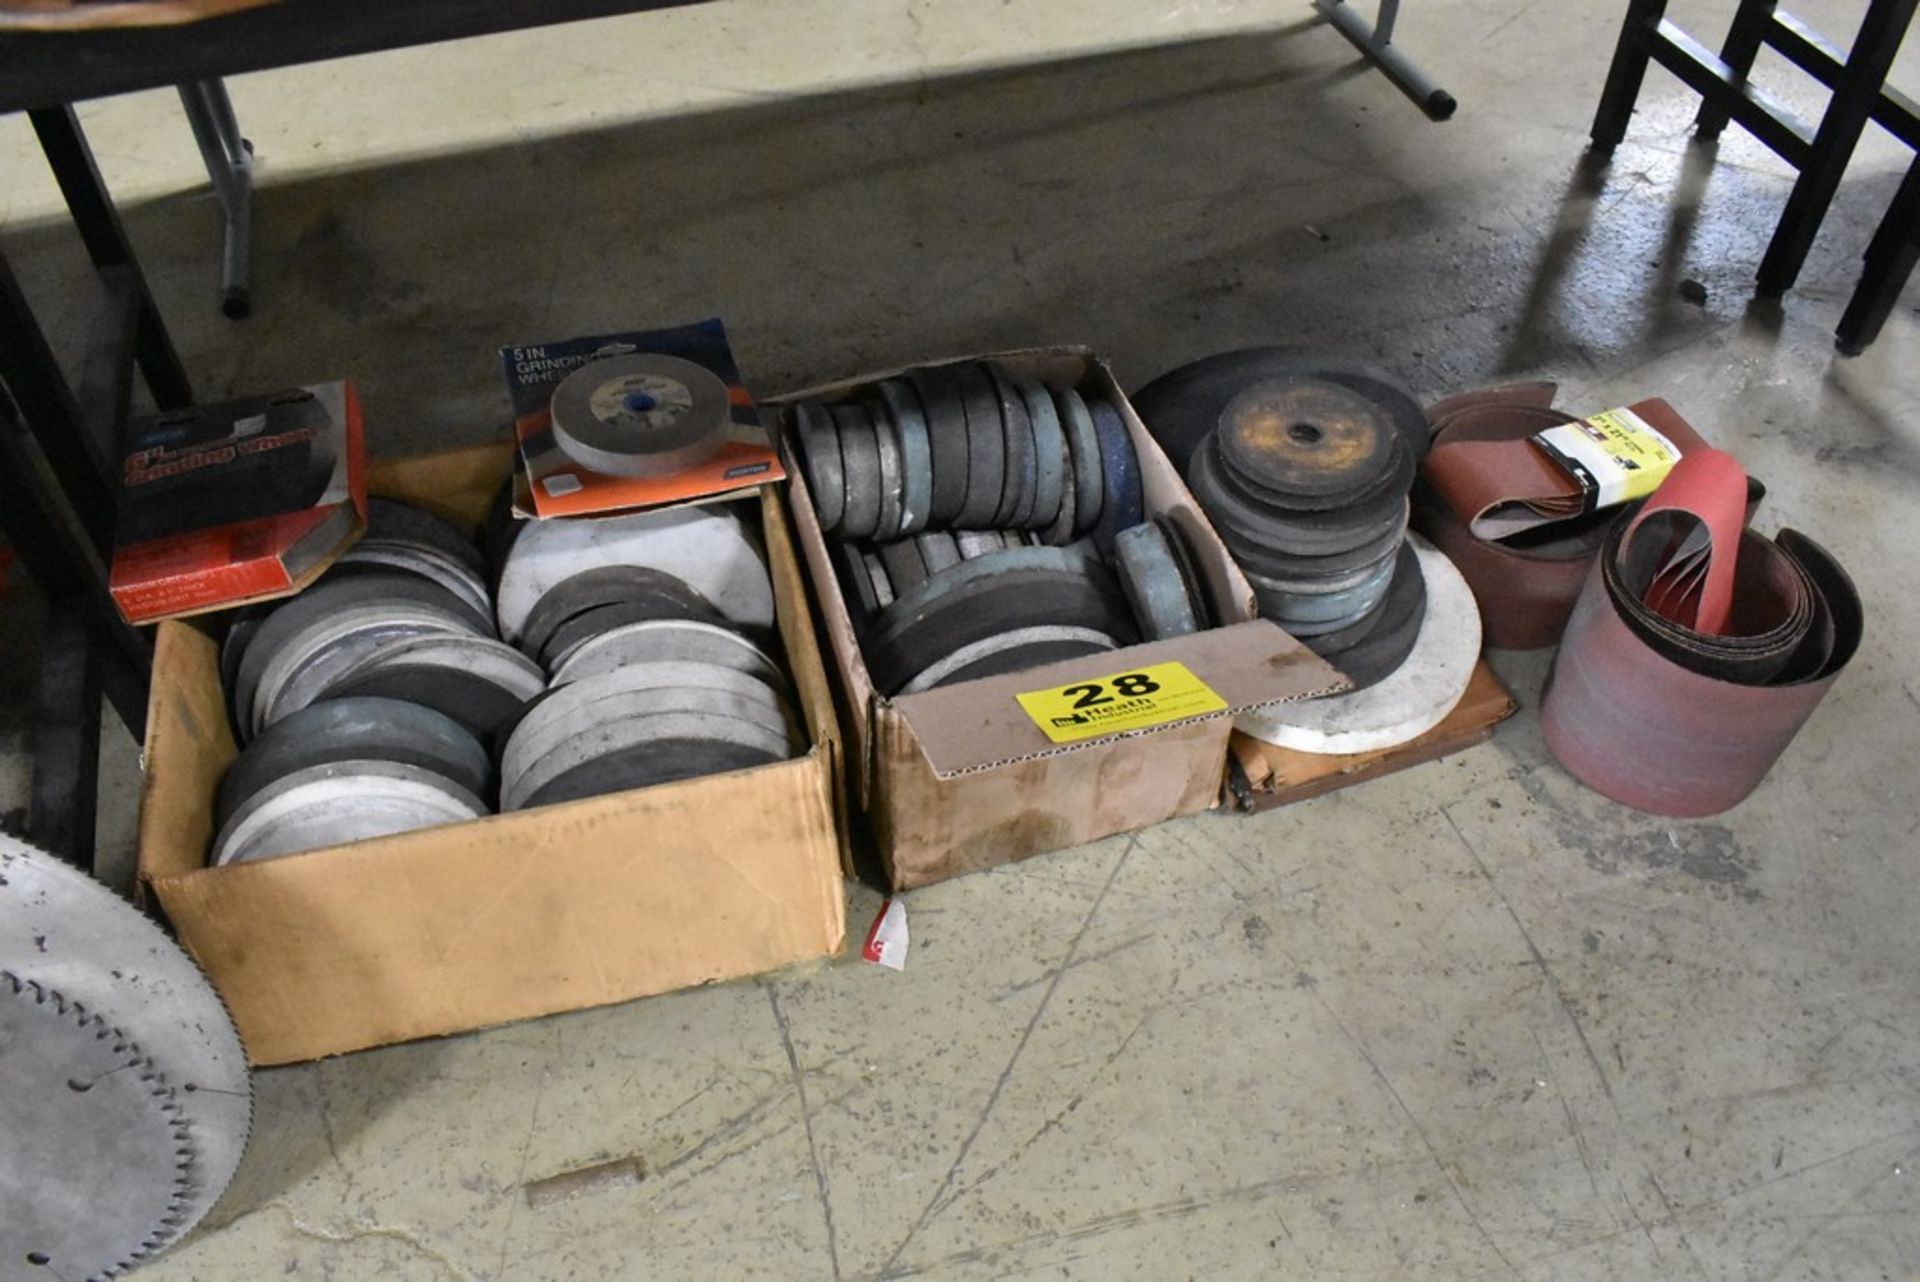 ASSORTED GRINDING WHEELS AND ABRASIVE BELTS UNDER BENCH - Image 2 of 2